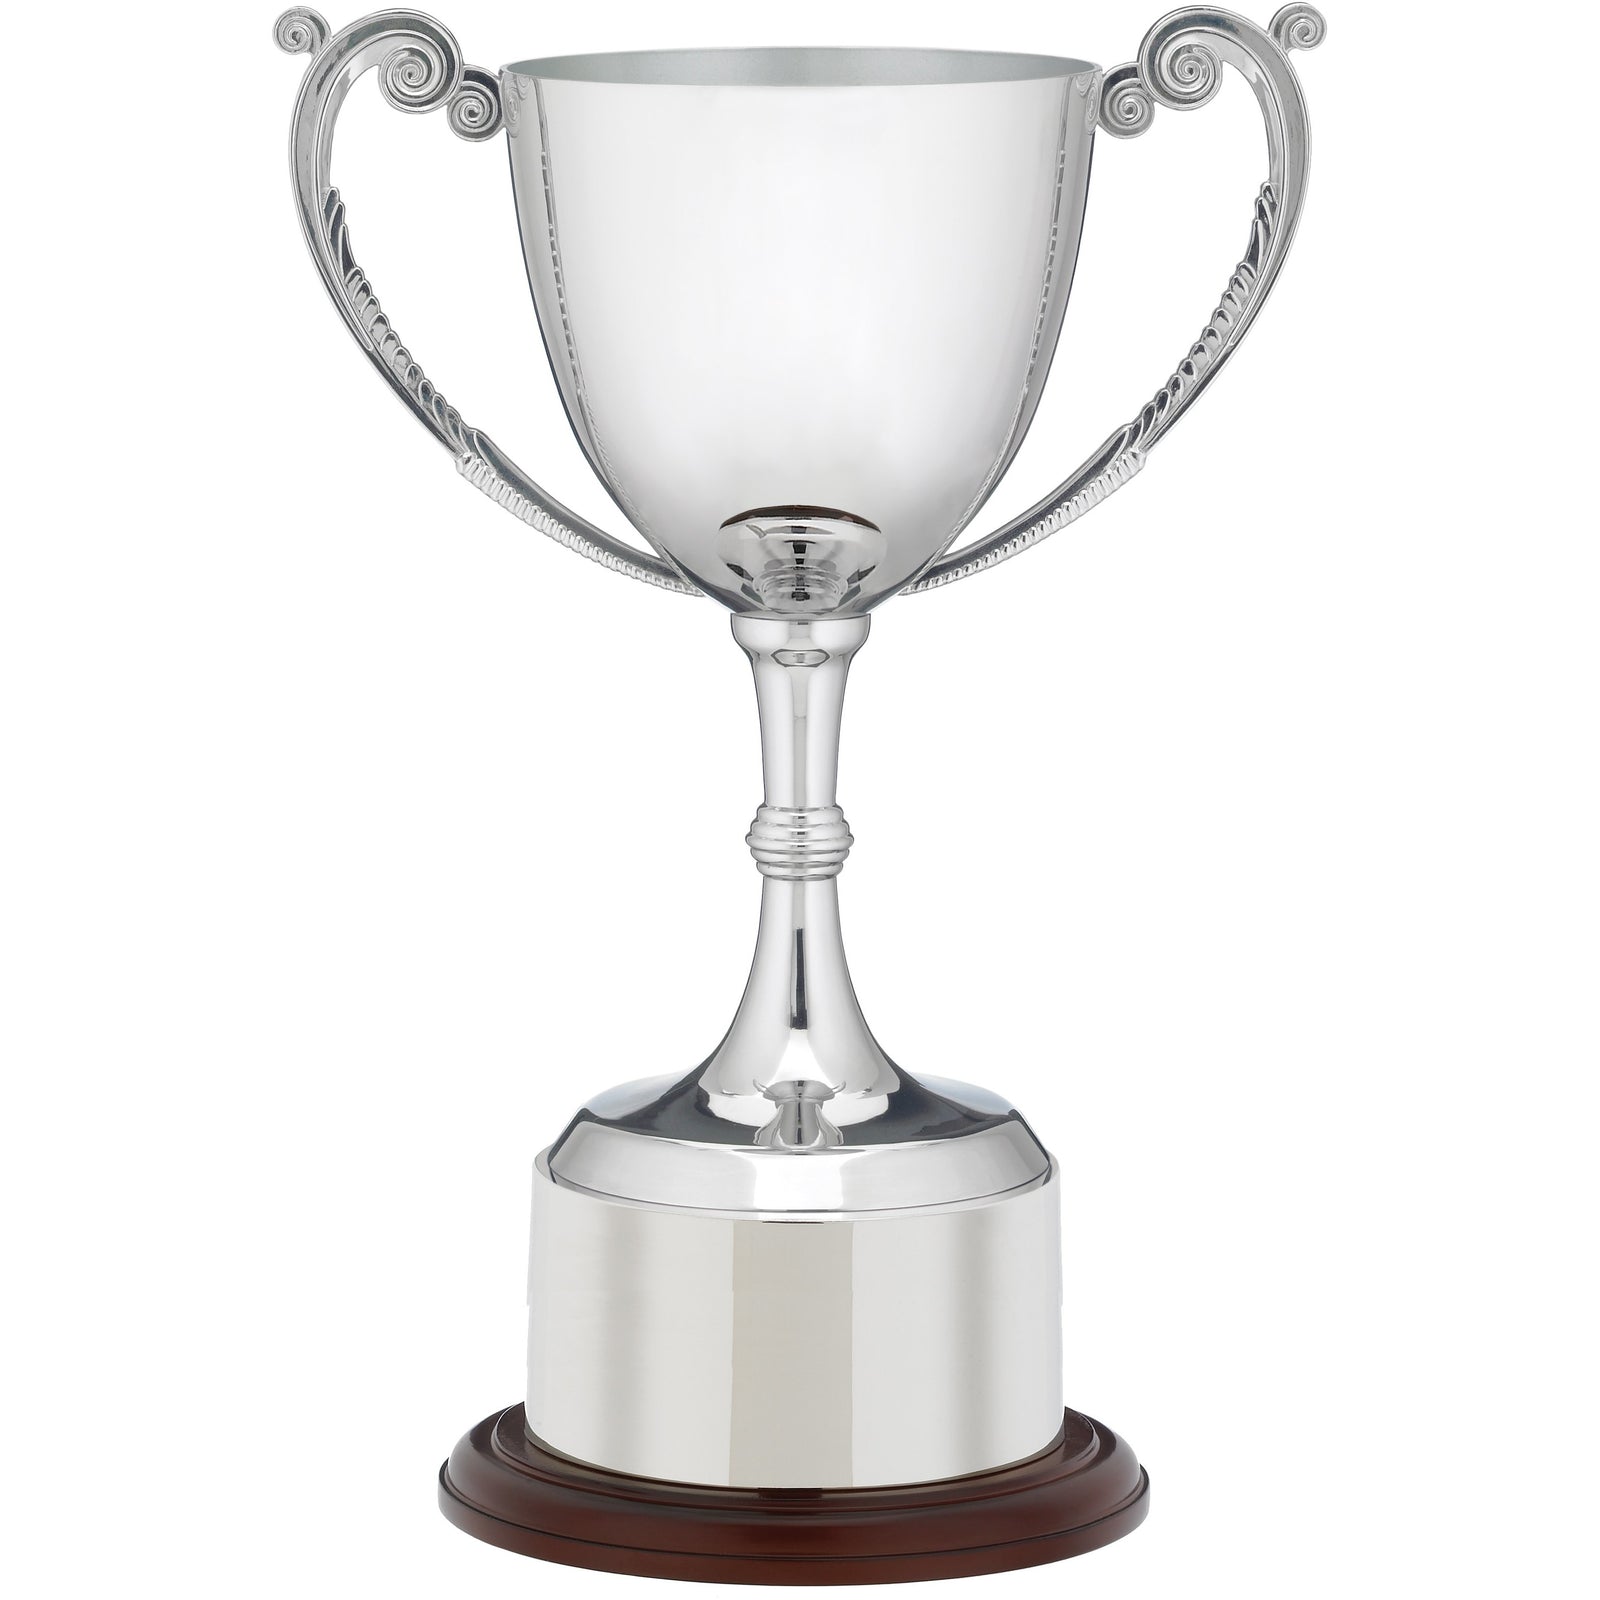 Recognition Silver Nickel Plated Presentation Cup with Wooden Base and Plinth Band 31cm (12.25